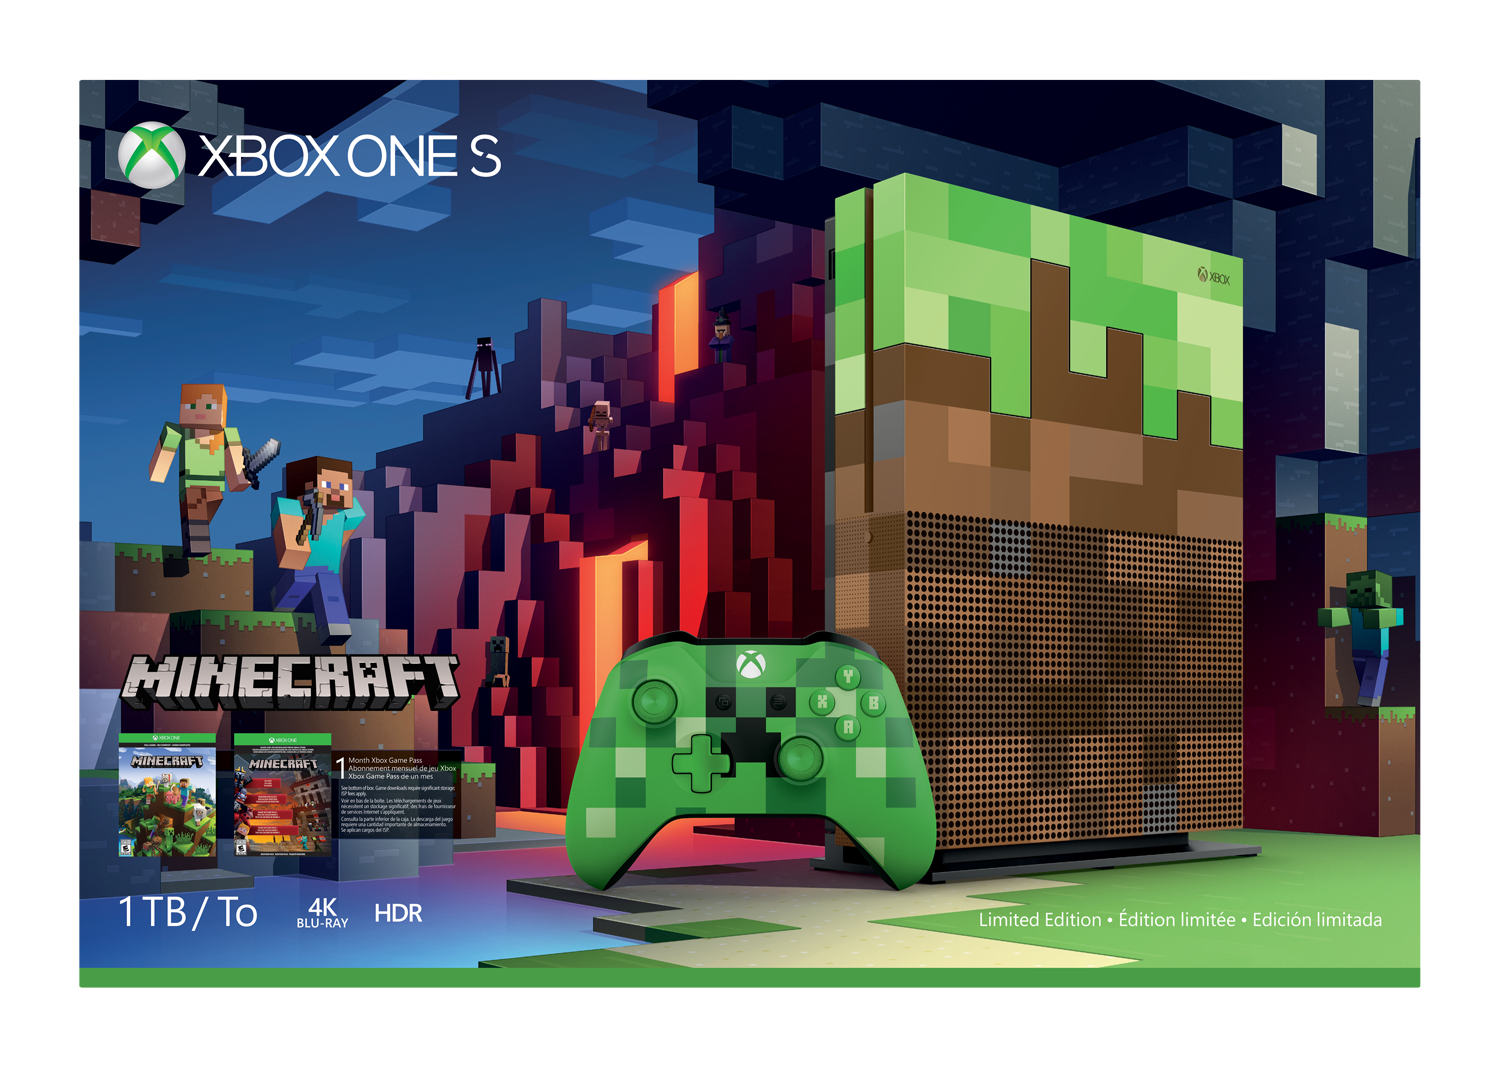 Minecraft Xbox One S limited edition console will join Microsoft's